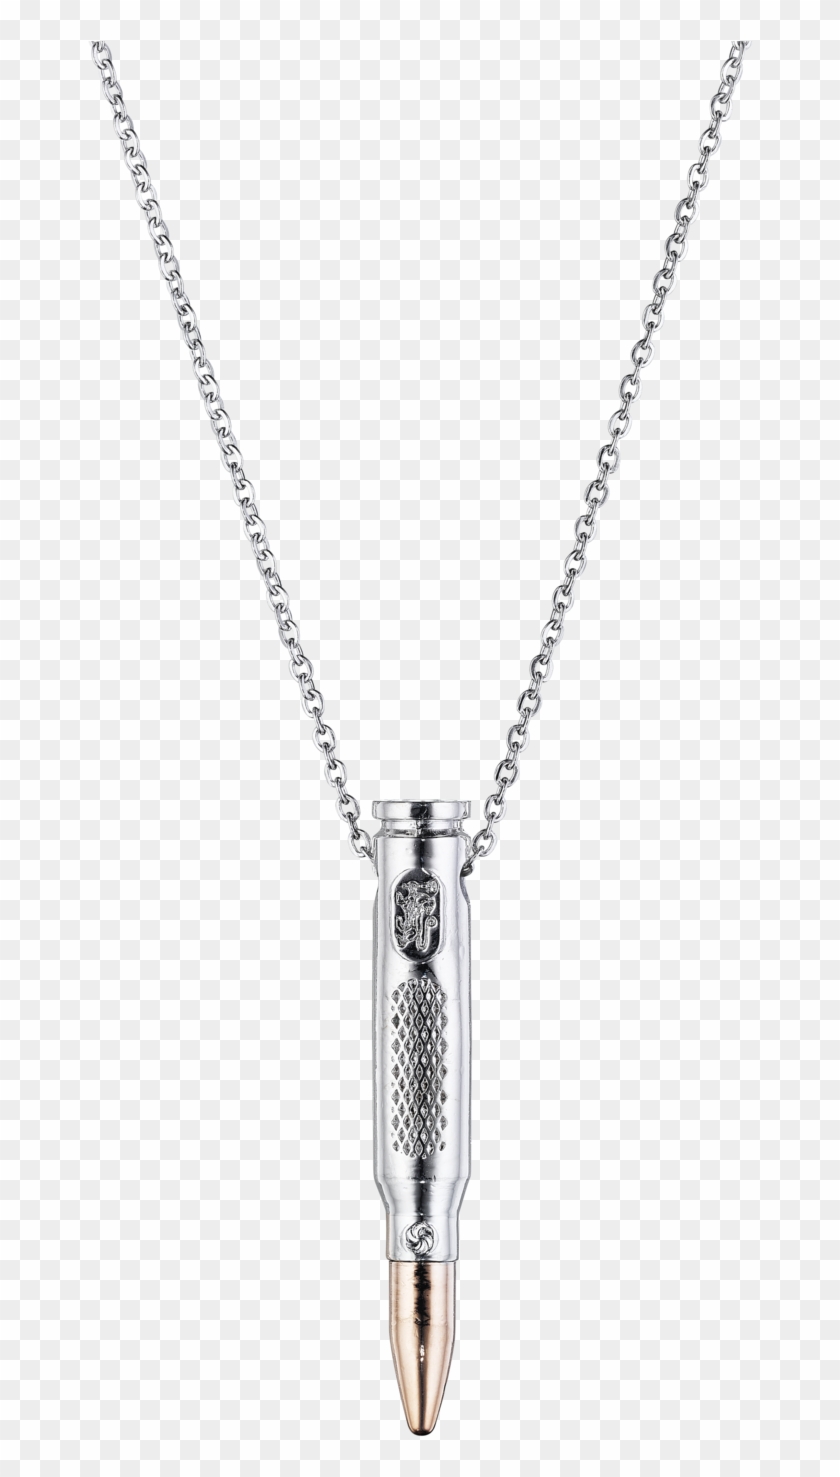 Distressed Silver Bullet Necklace - Necklace Clipart #3487244